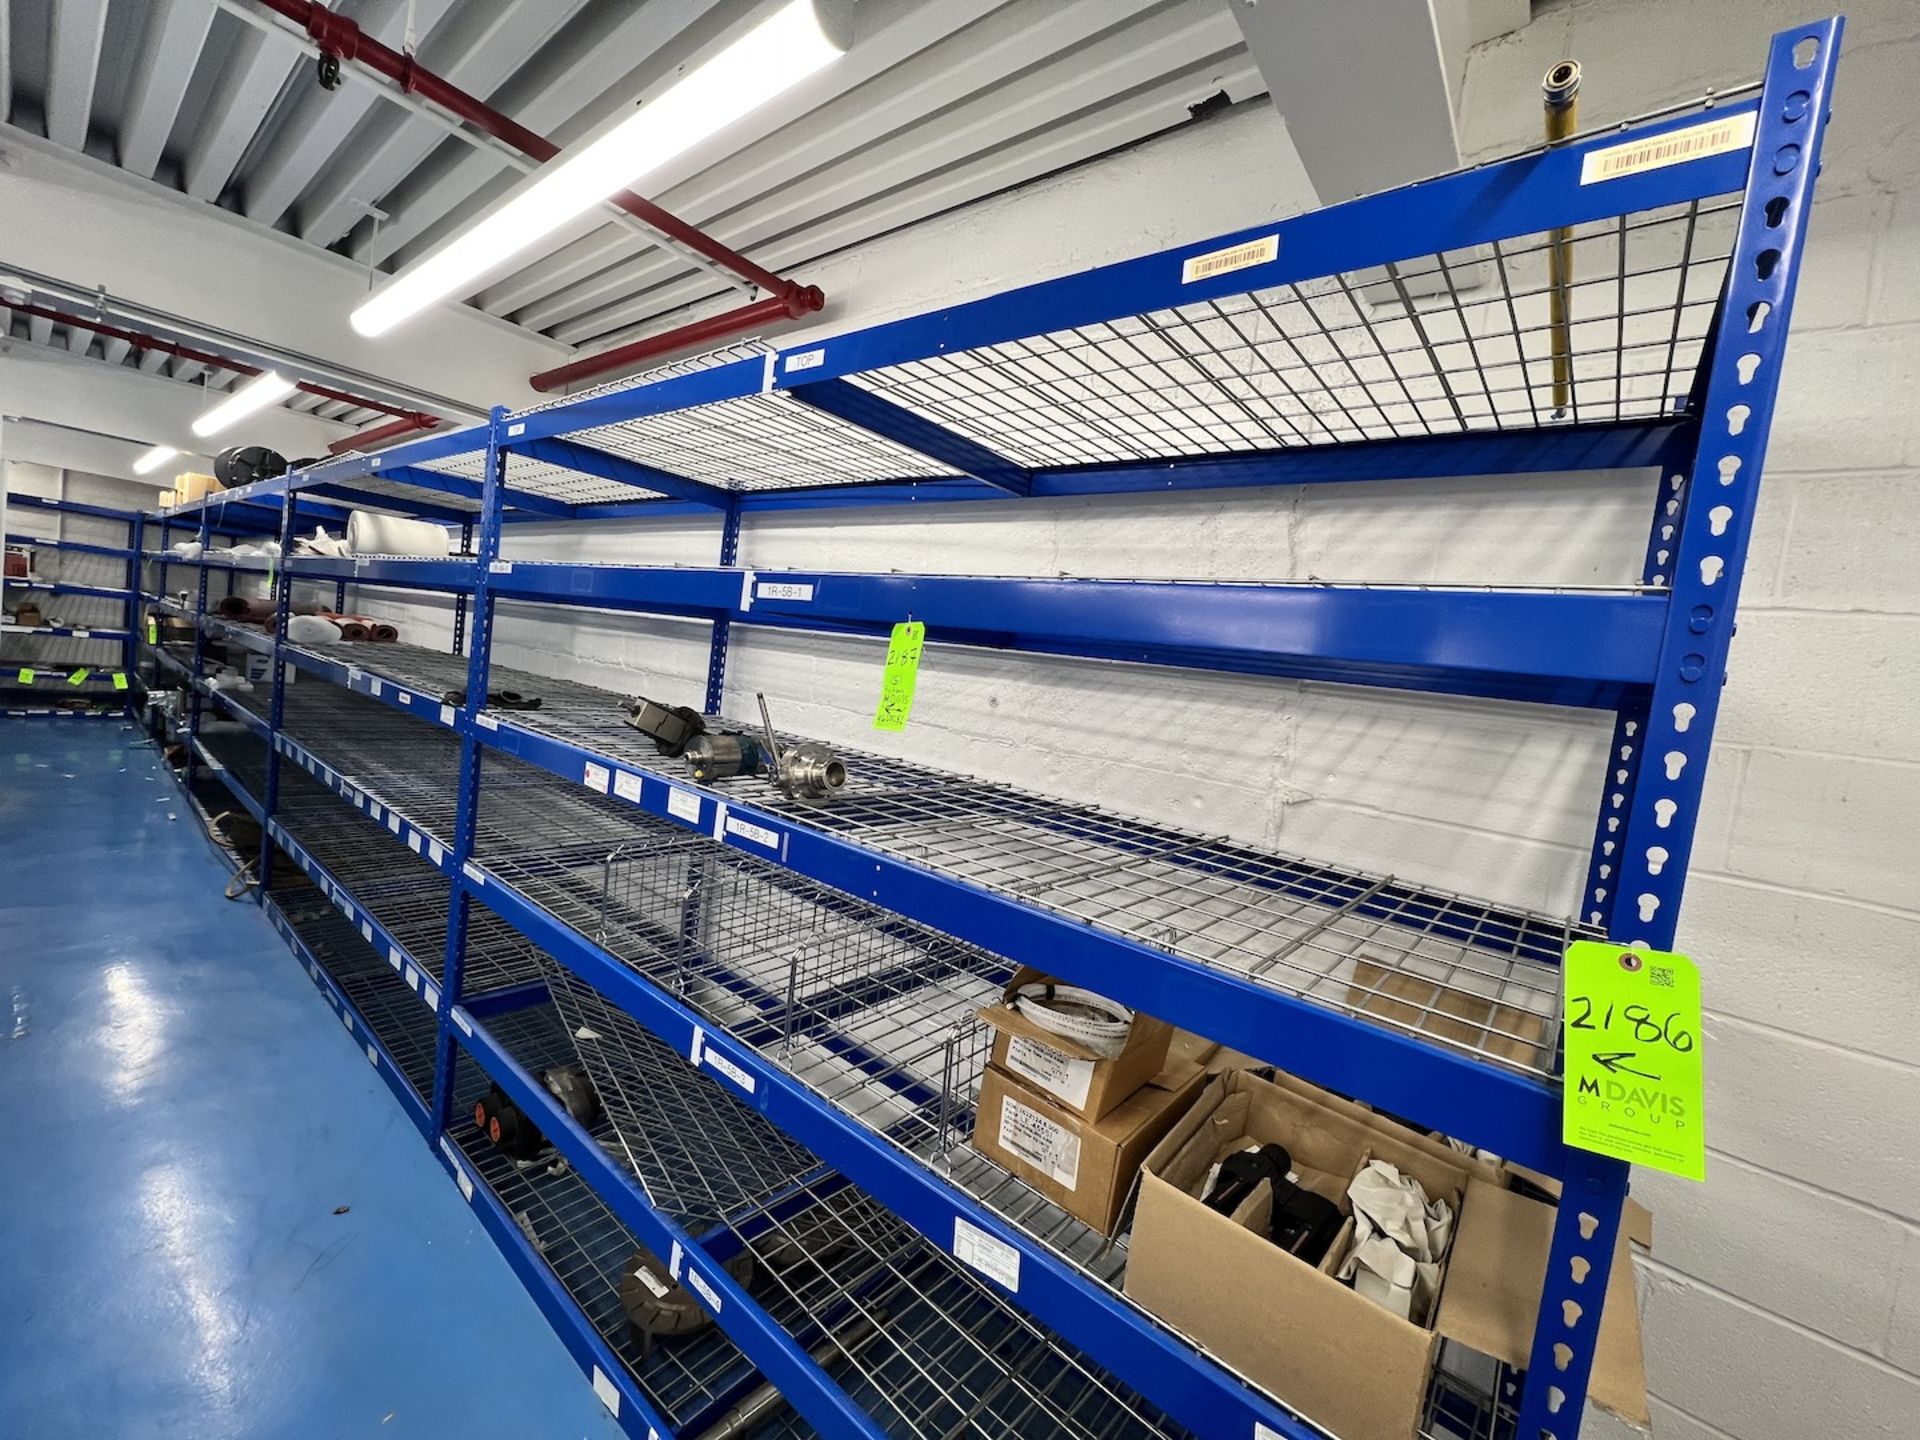 WIDE SPAN STORAGE RACK WITH WIRE DECKING, 5-SECTIONS, EACH SECTION IS 96 IN. L X 30 IN. W X 82 IN.